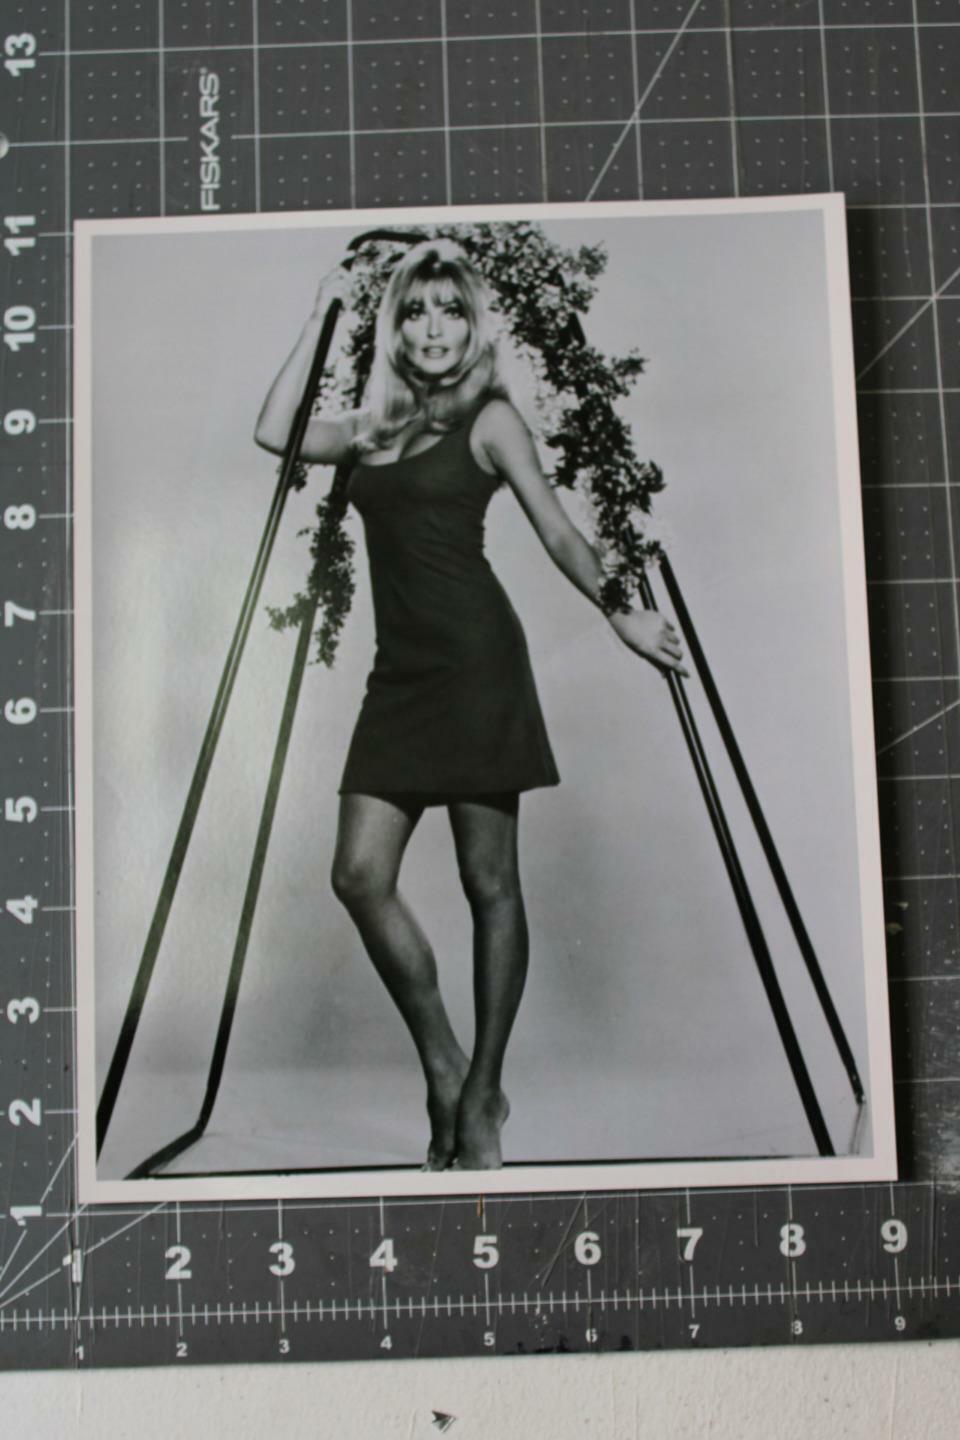 Sharon Tate Glamor Photo 5 ☆ very popular Sales of SALE items from new works Reprint Beautiful 8x10 VF Still